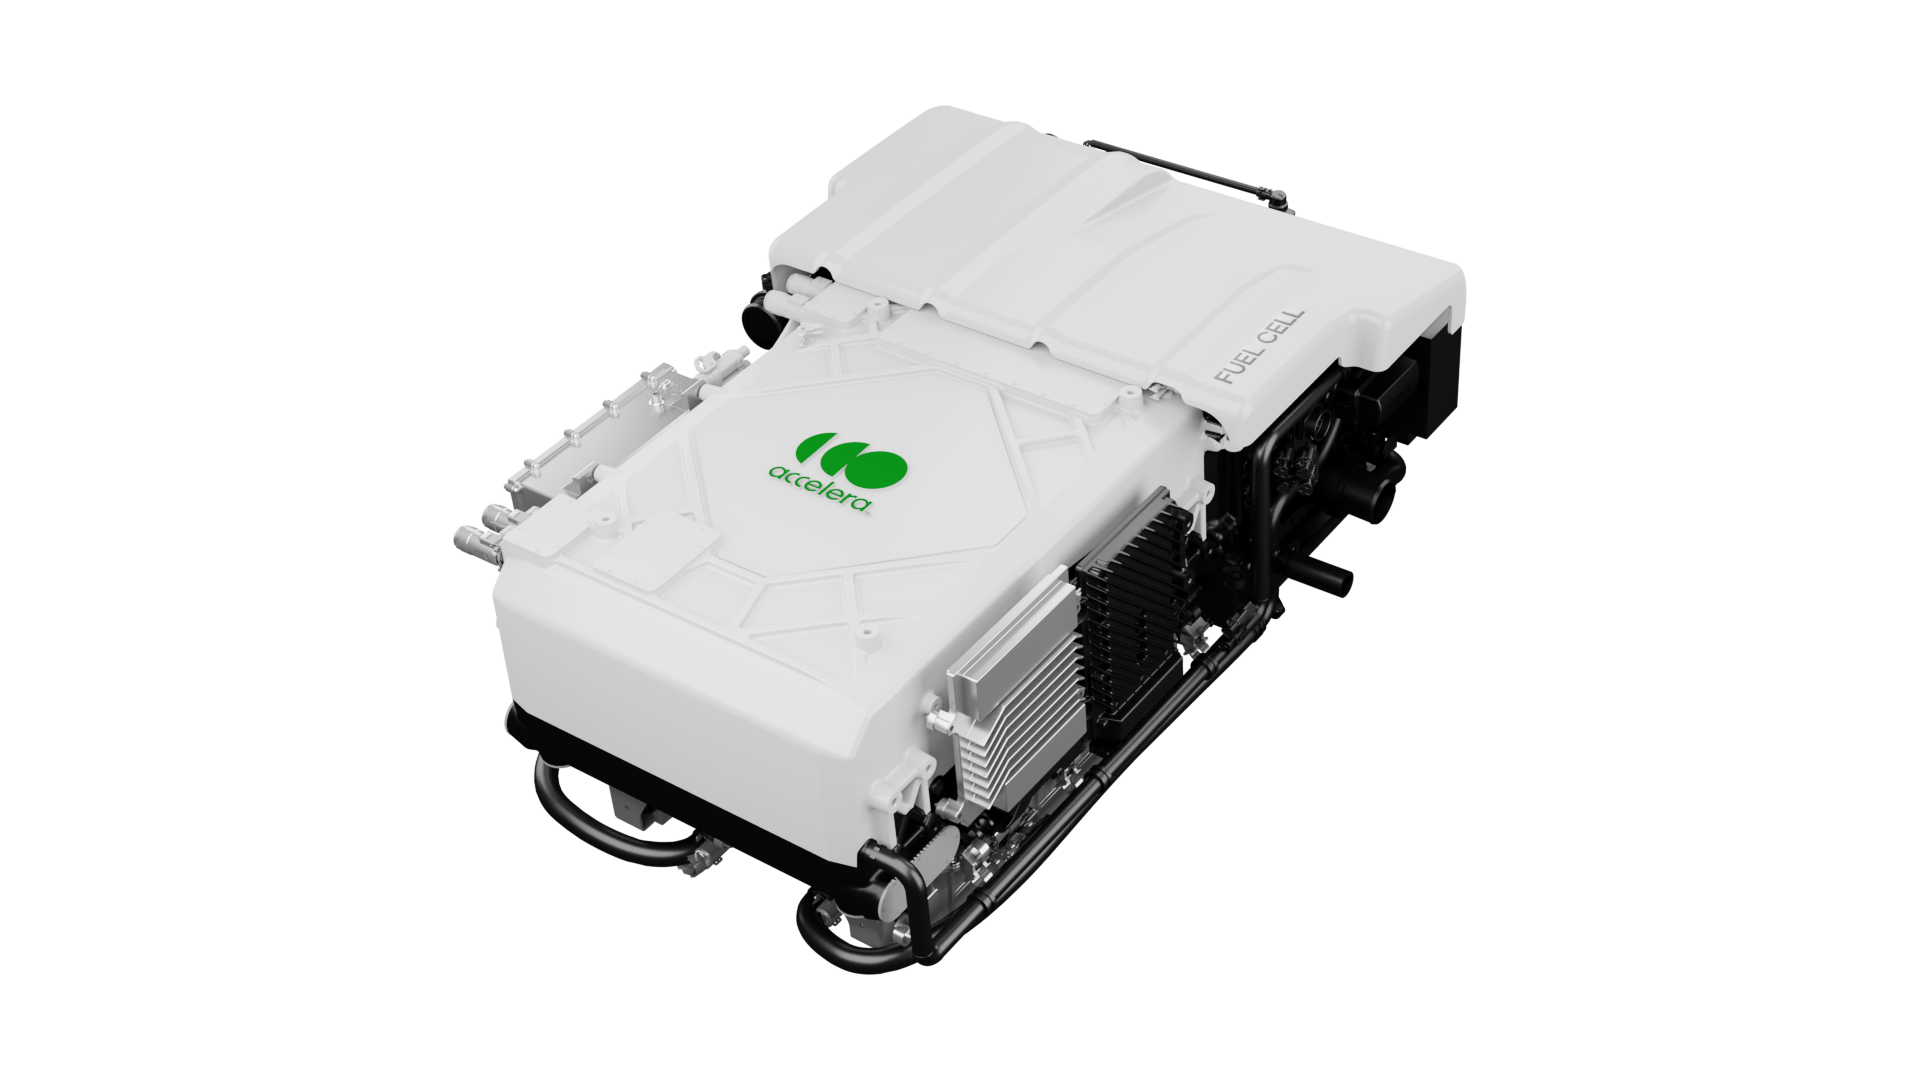 Product rendering of an Accelera fuel cell module